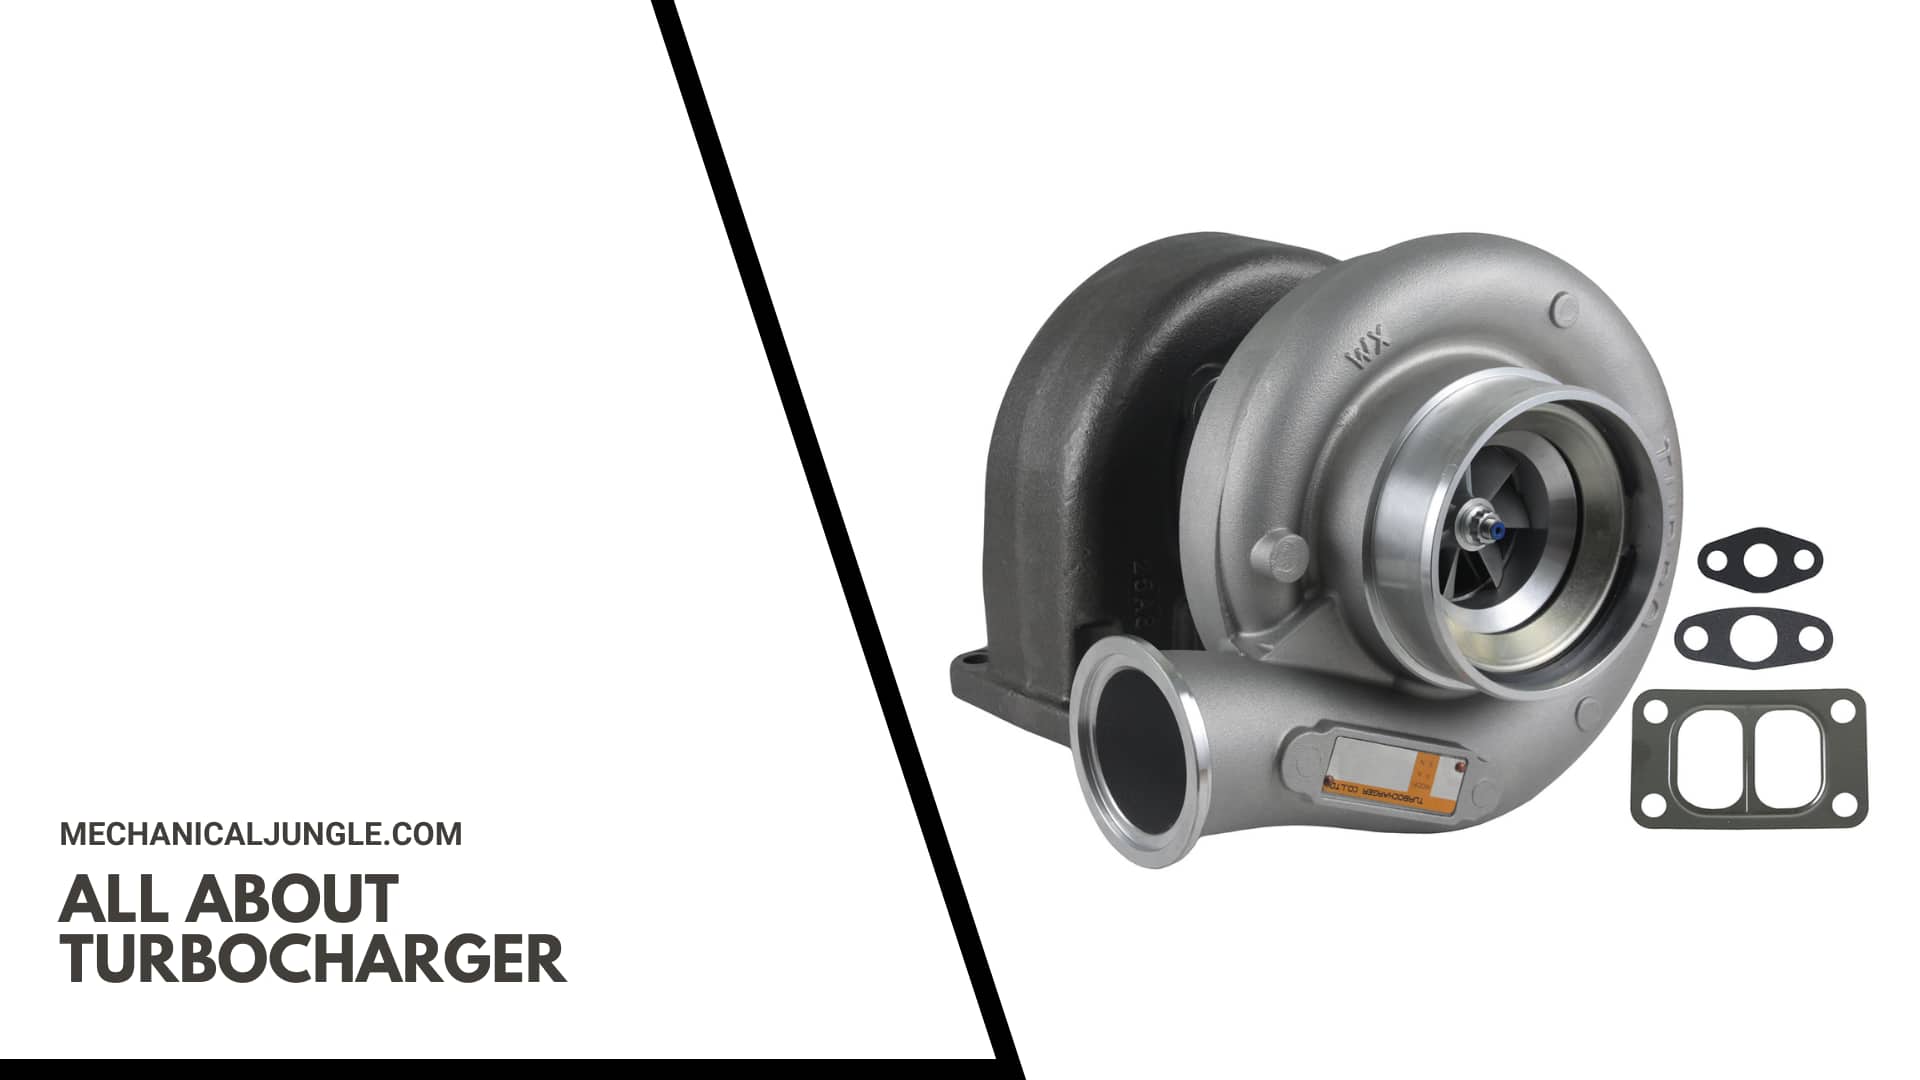 All About Turbocharger